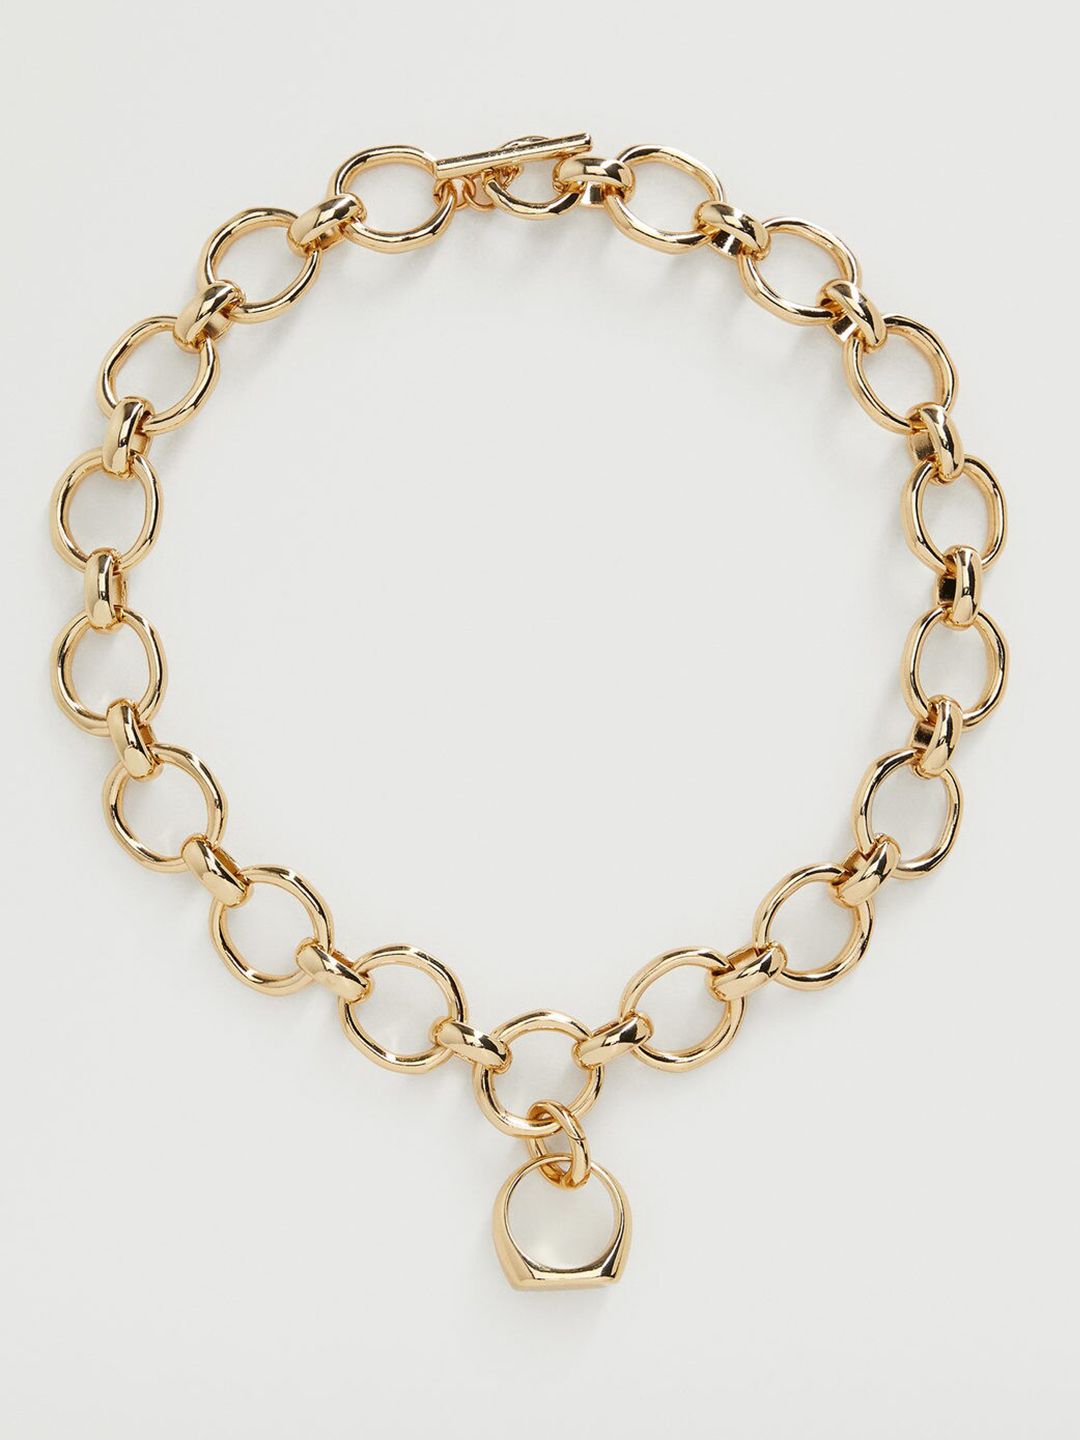 MANGO Gold-Toned Linked Chain Necklace Price in India